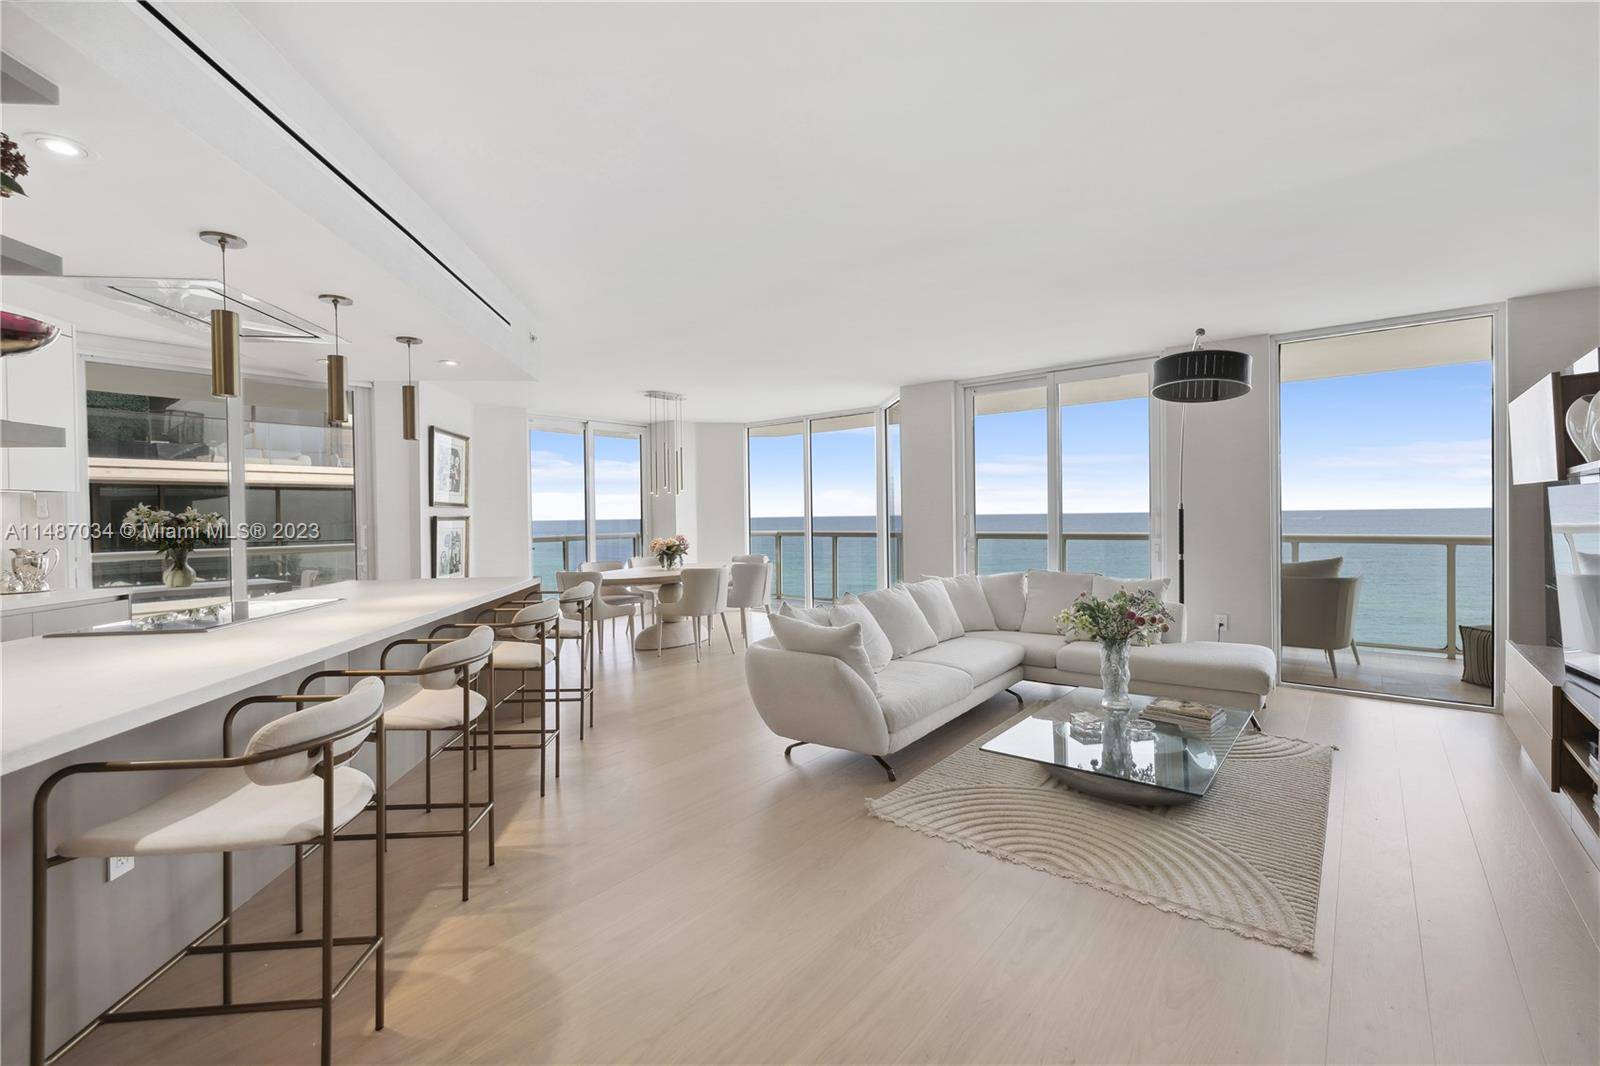 Complete state of the art renovation 1700 sq ft 2Br 2 1 5 bath corner unit, Views of ocean from every room, Italkraft Gourmet kitchen, subzero refrig, wolf appliances including ...